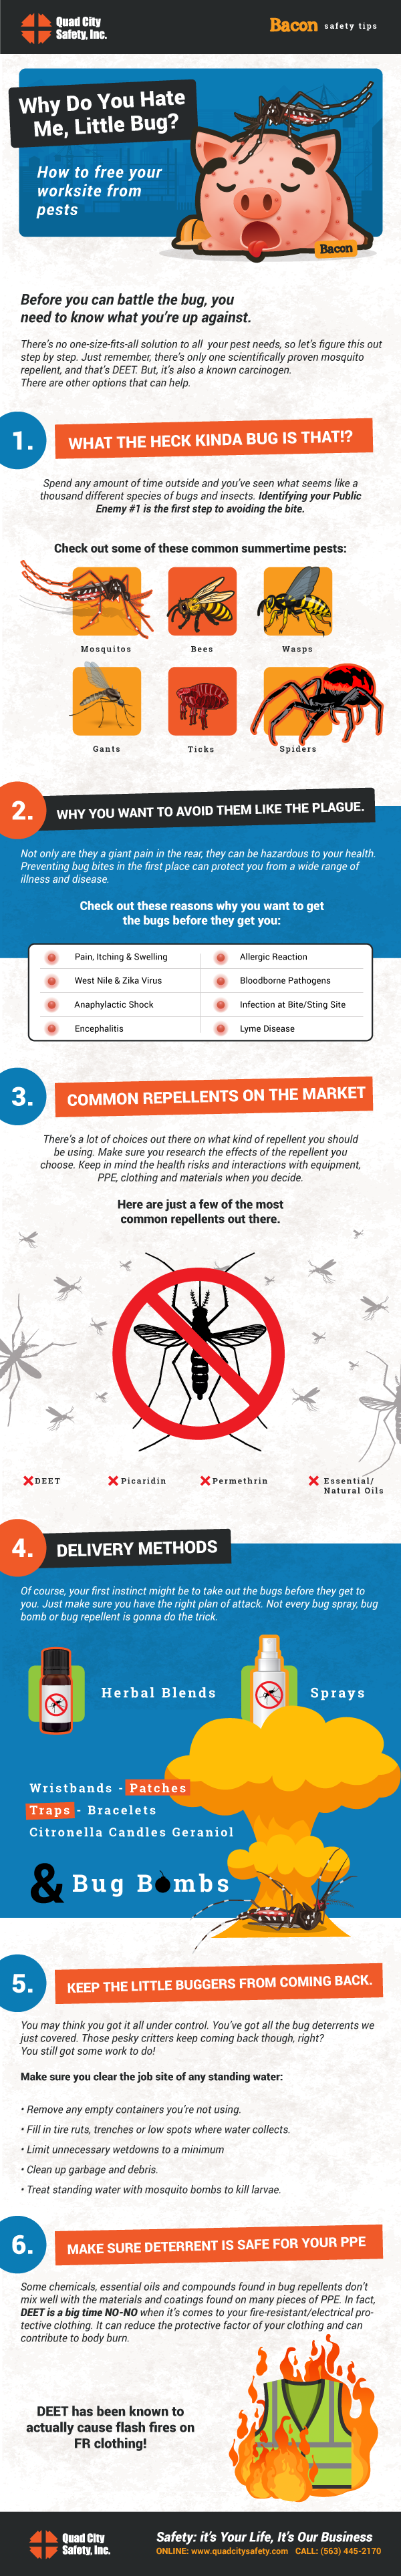 Bacon's-Safety-Tips-C05-Bug-Spray-Infographic